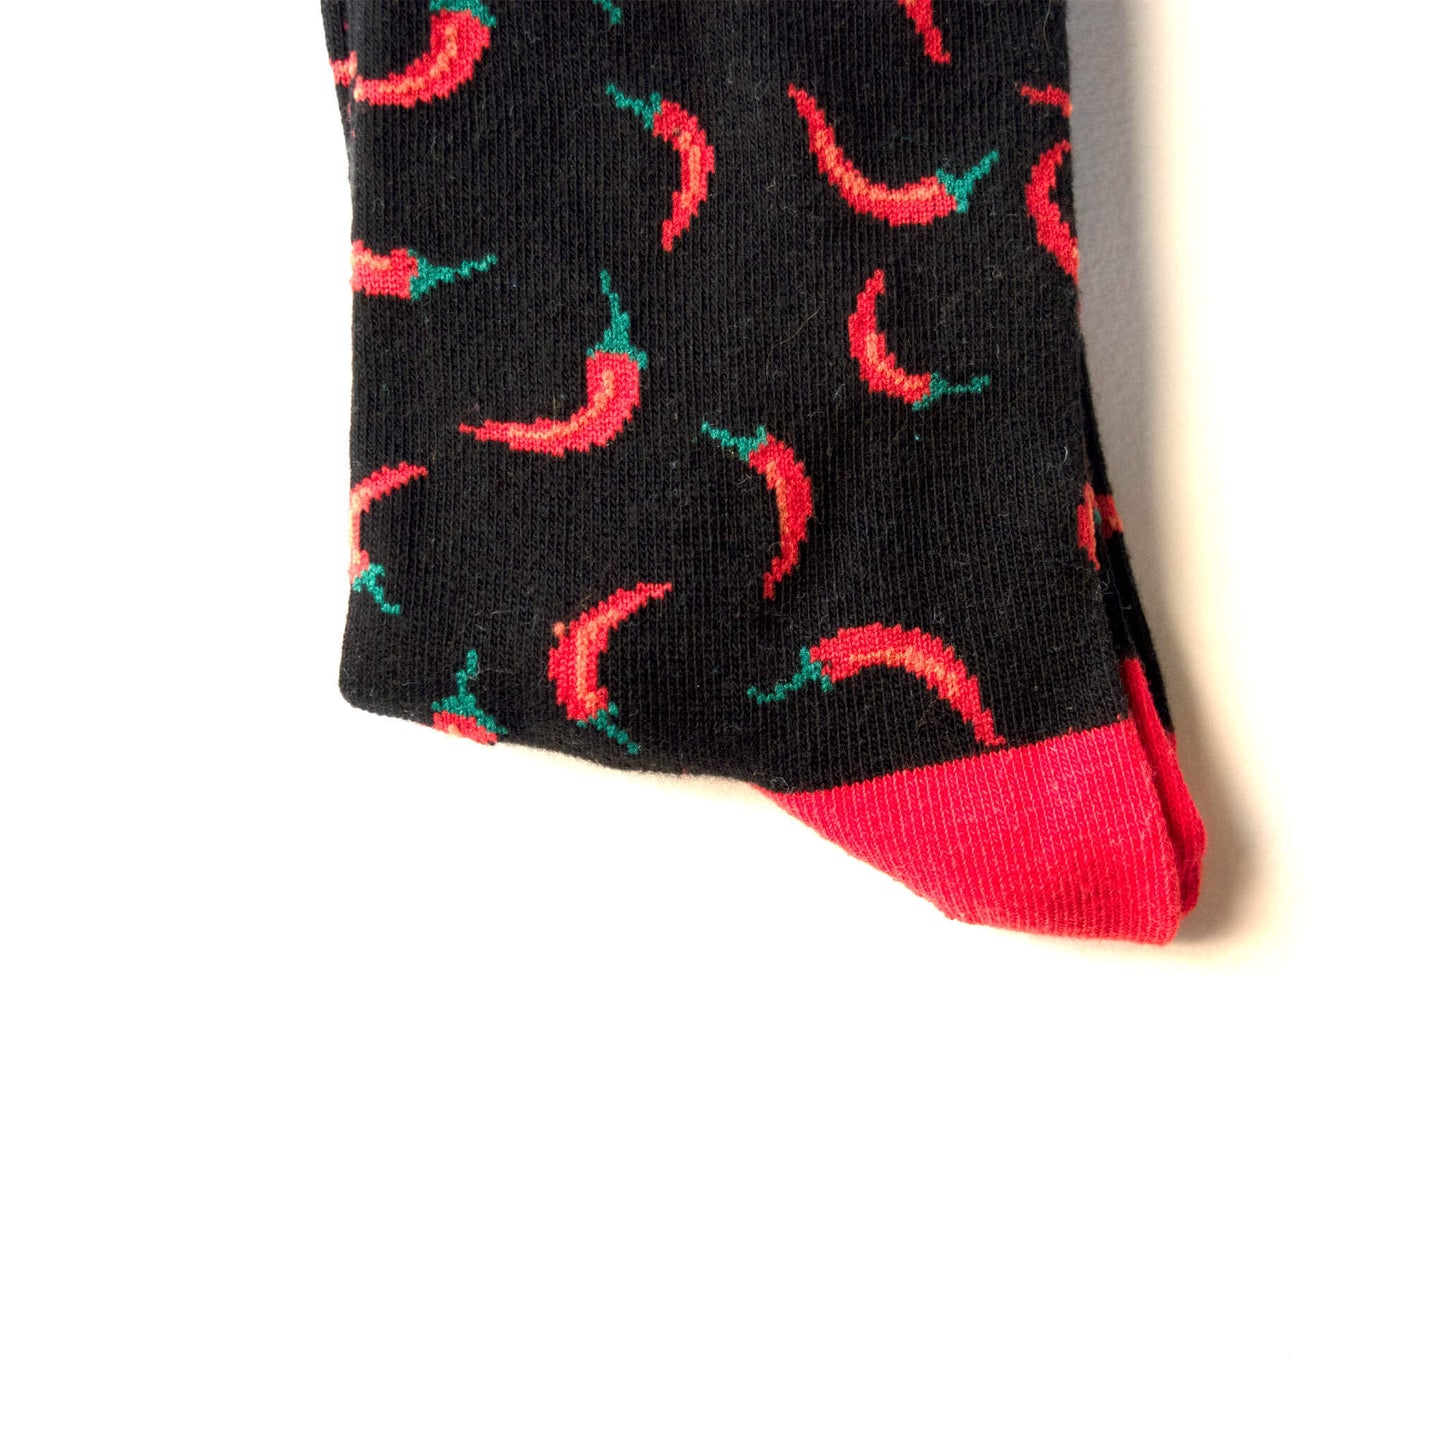 Black and Red Chilli Socks